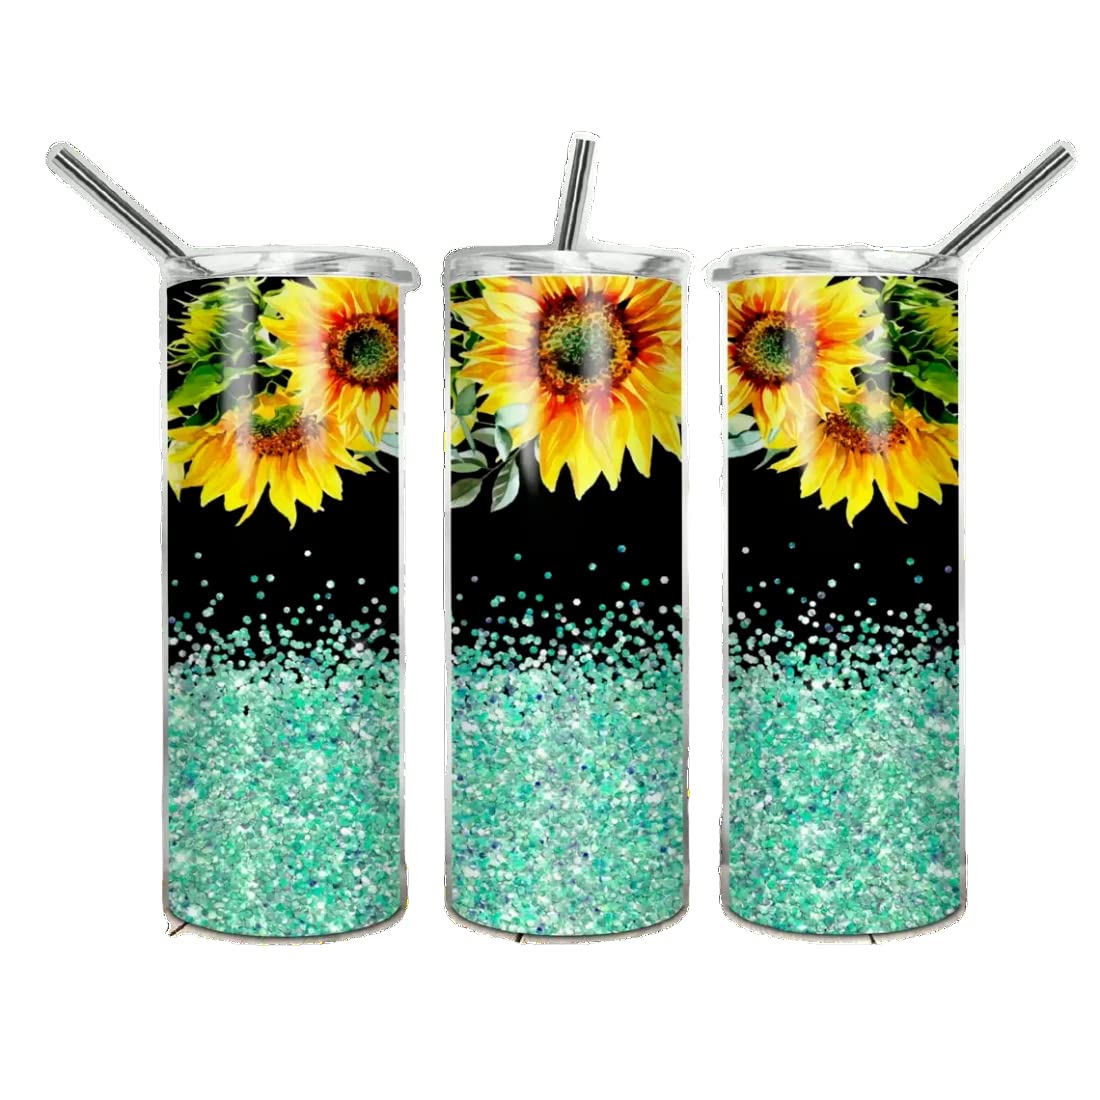 Sunflower Tumbler Sublimation Wrap, Ready to Press, 20 oz Straight Tumbler, Sunflowers Transfer for Tumbler, Flower Tumbler Transfer Wrap